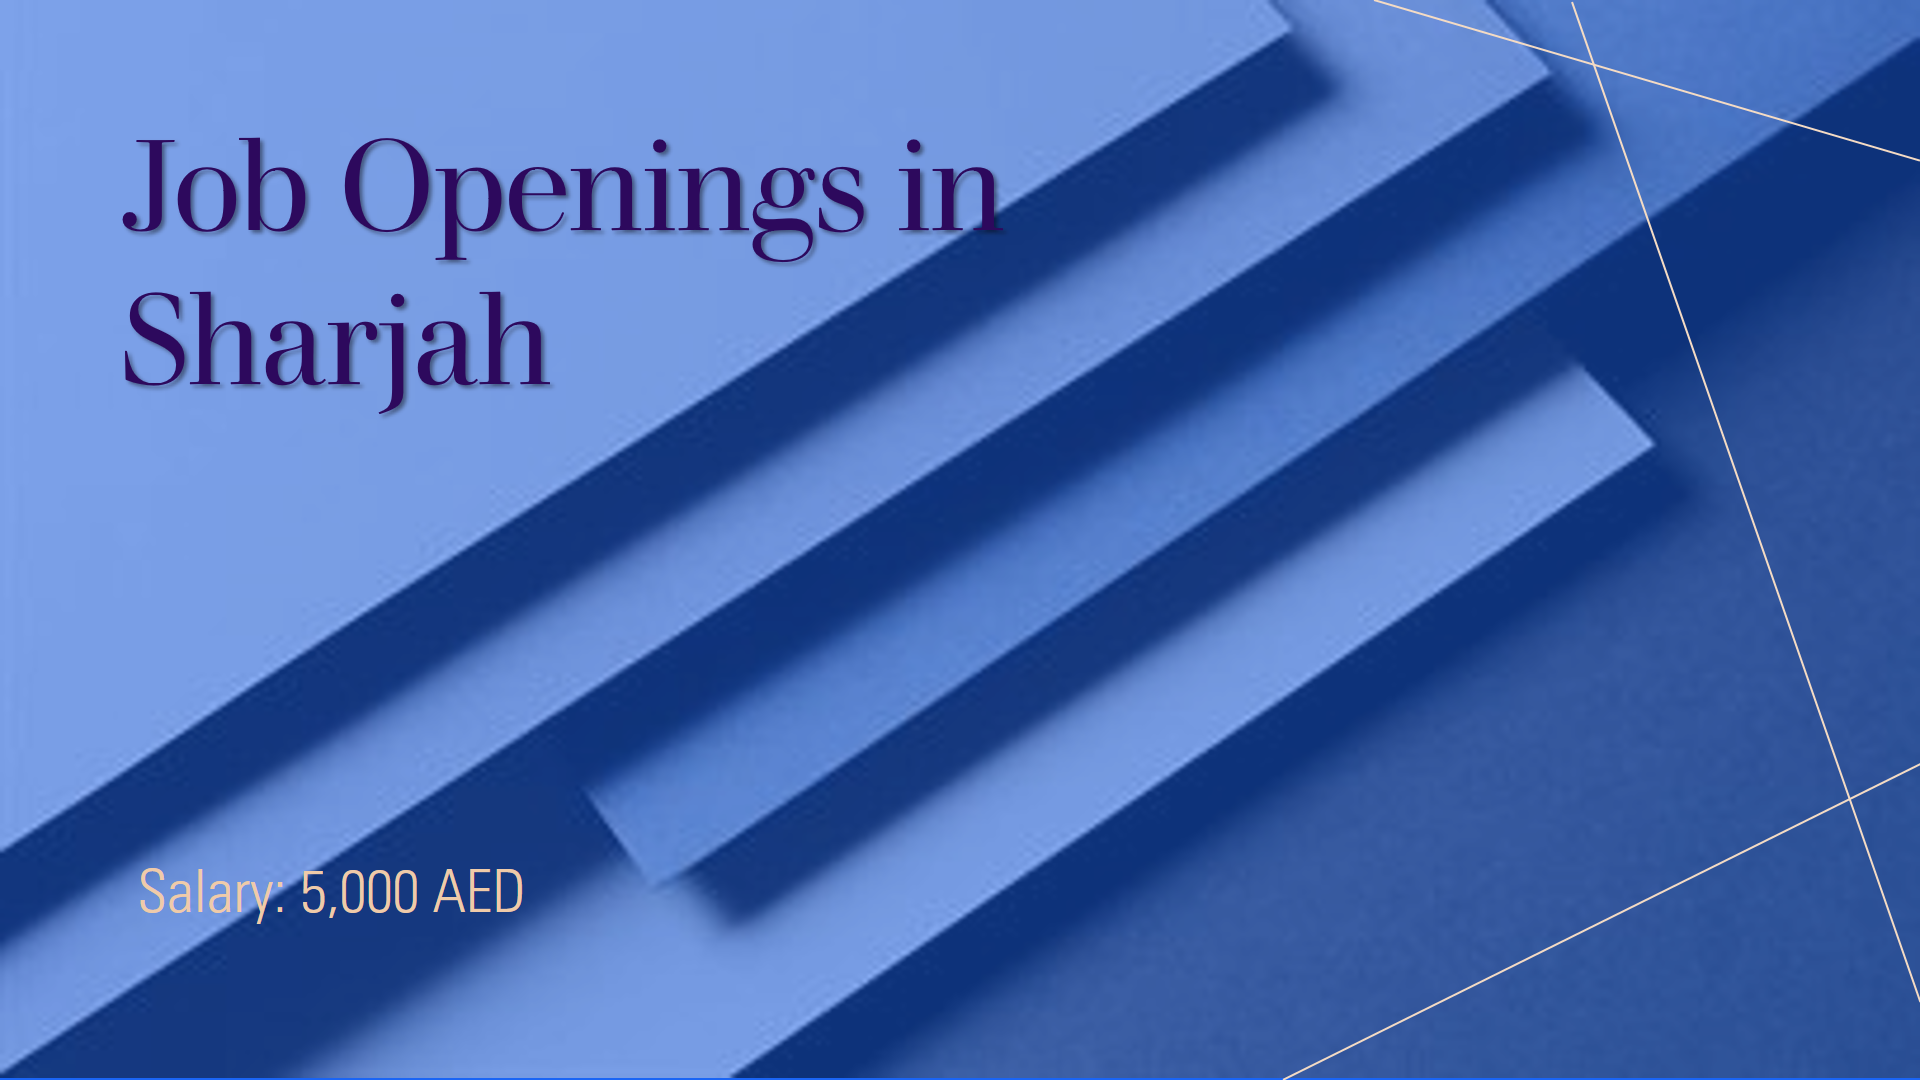 job openings in sharjah with salary 5,000 AED